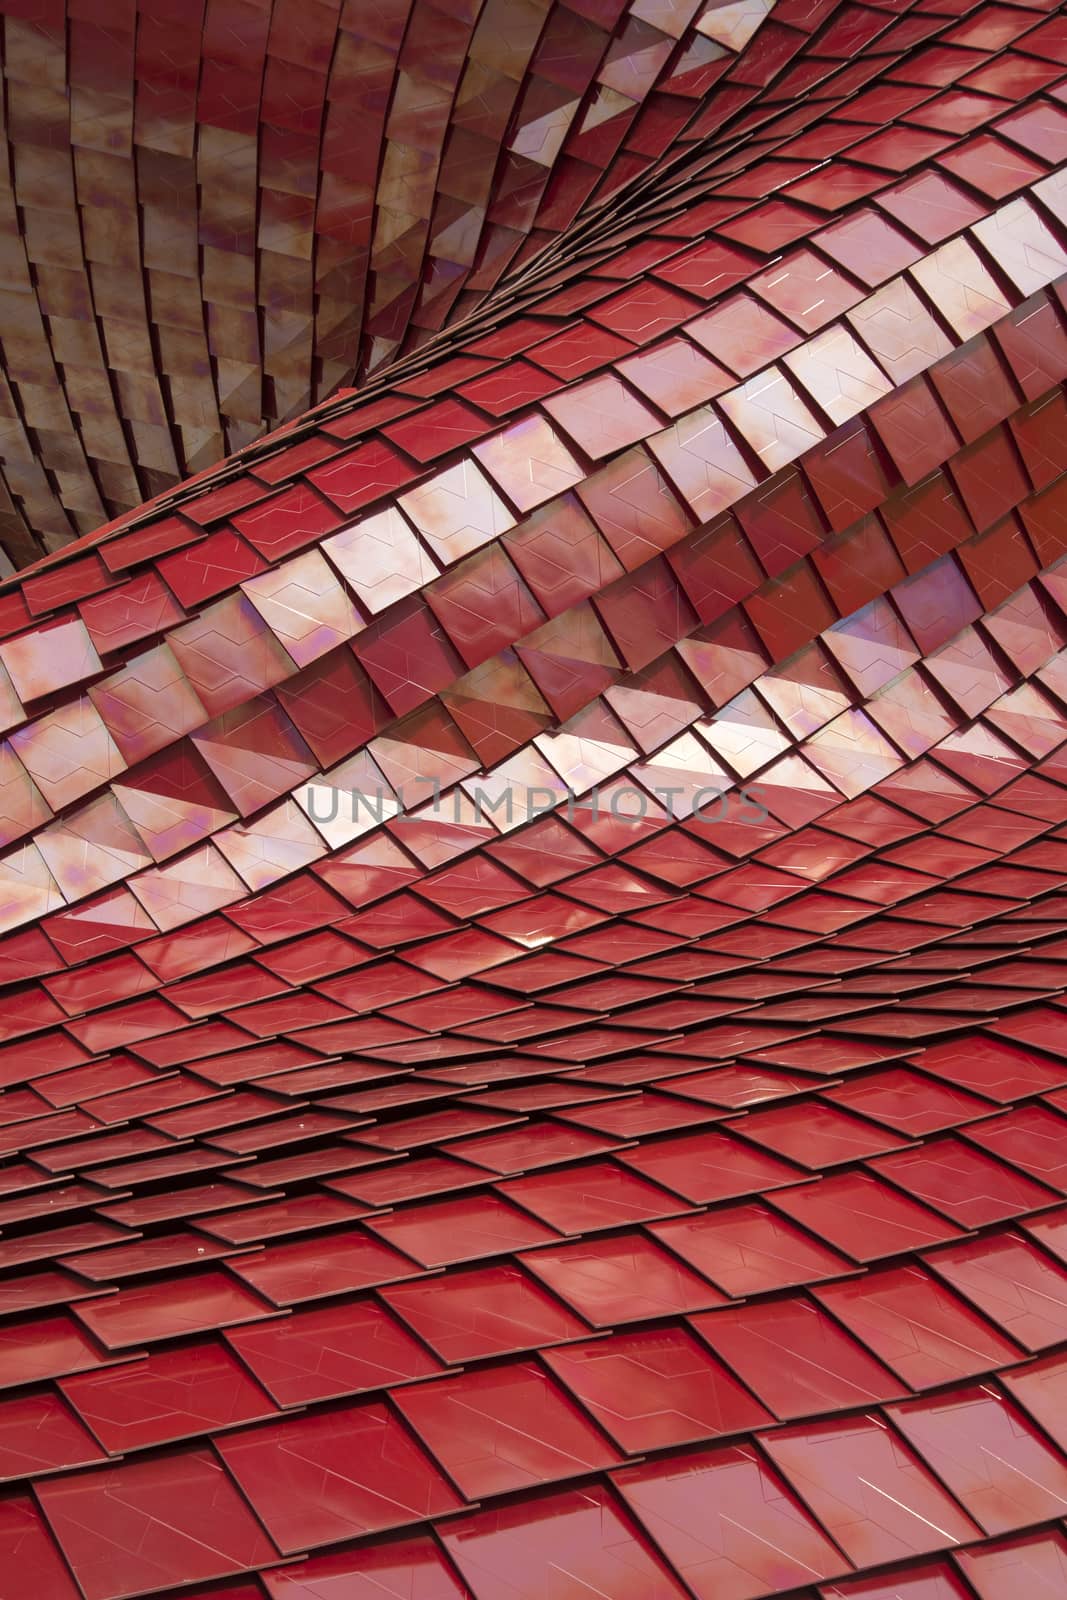 Coverage of red tiles by fotografiche.eu